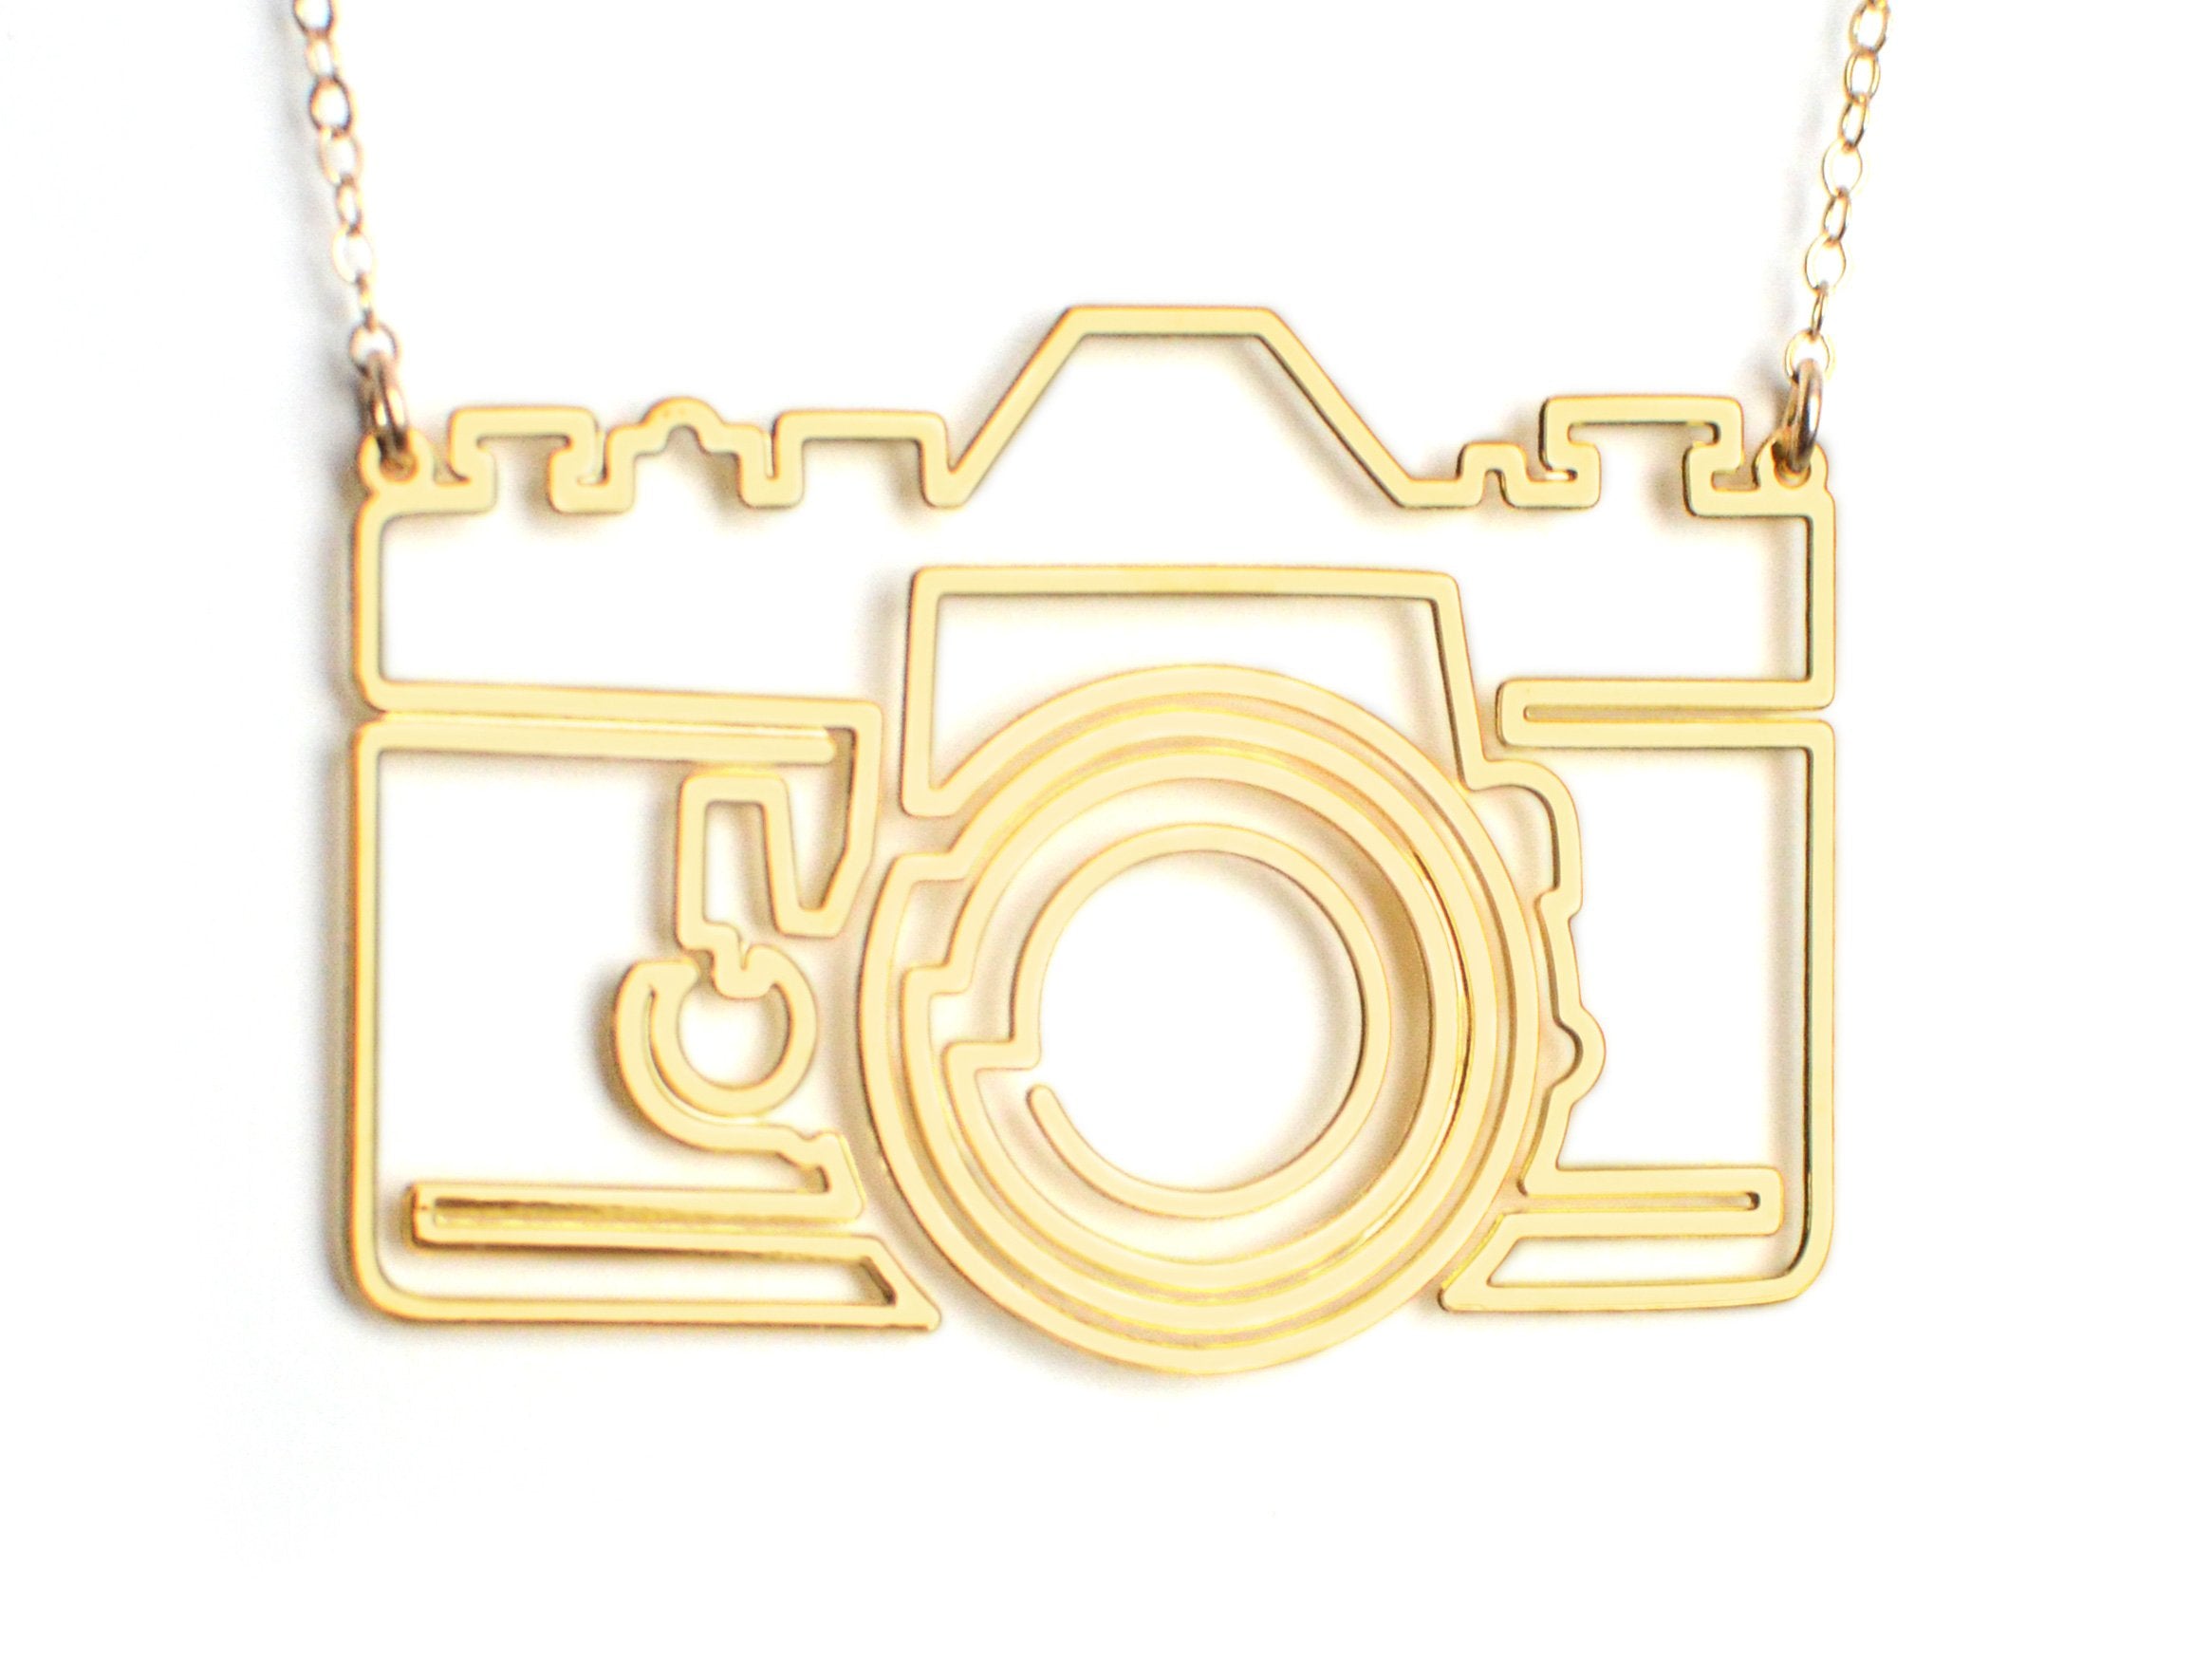 Photo Camera Necklace - High Quality, Affordable, Hand Drawn, Courageous Creators Necklace - Available in Gold and Silver - Made in USA - Collaboration with Honto88 - Brevity Jewelry